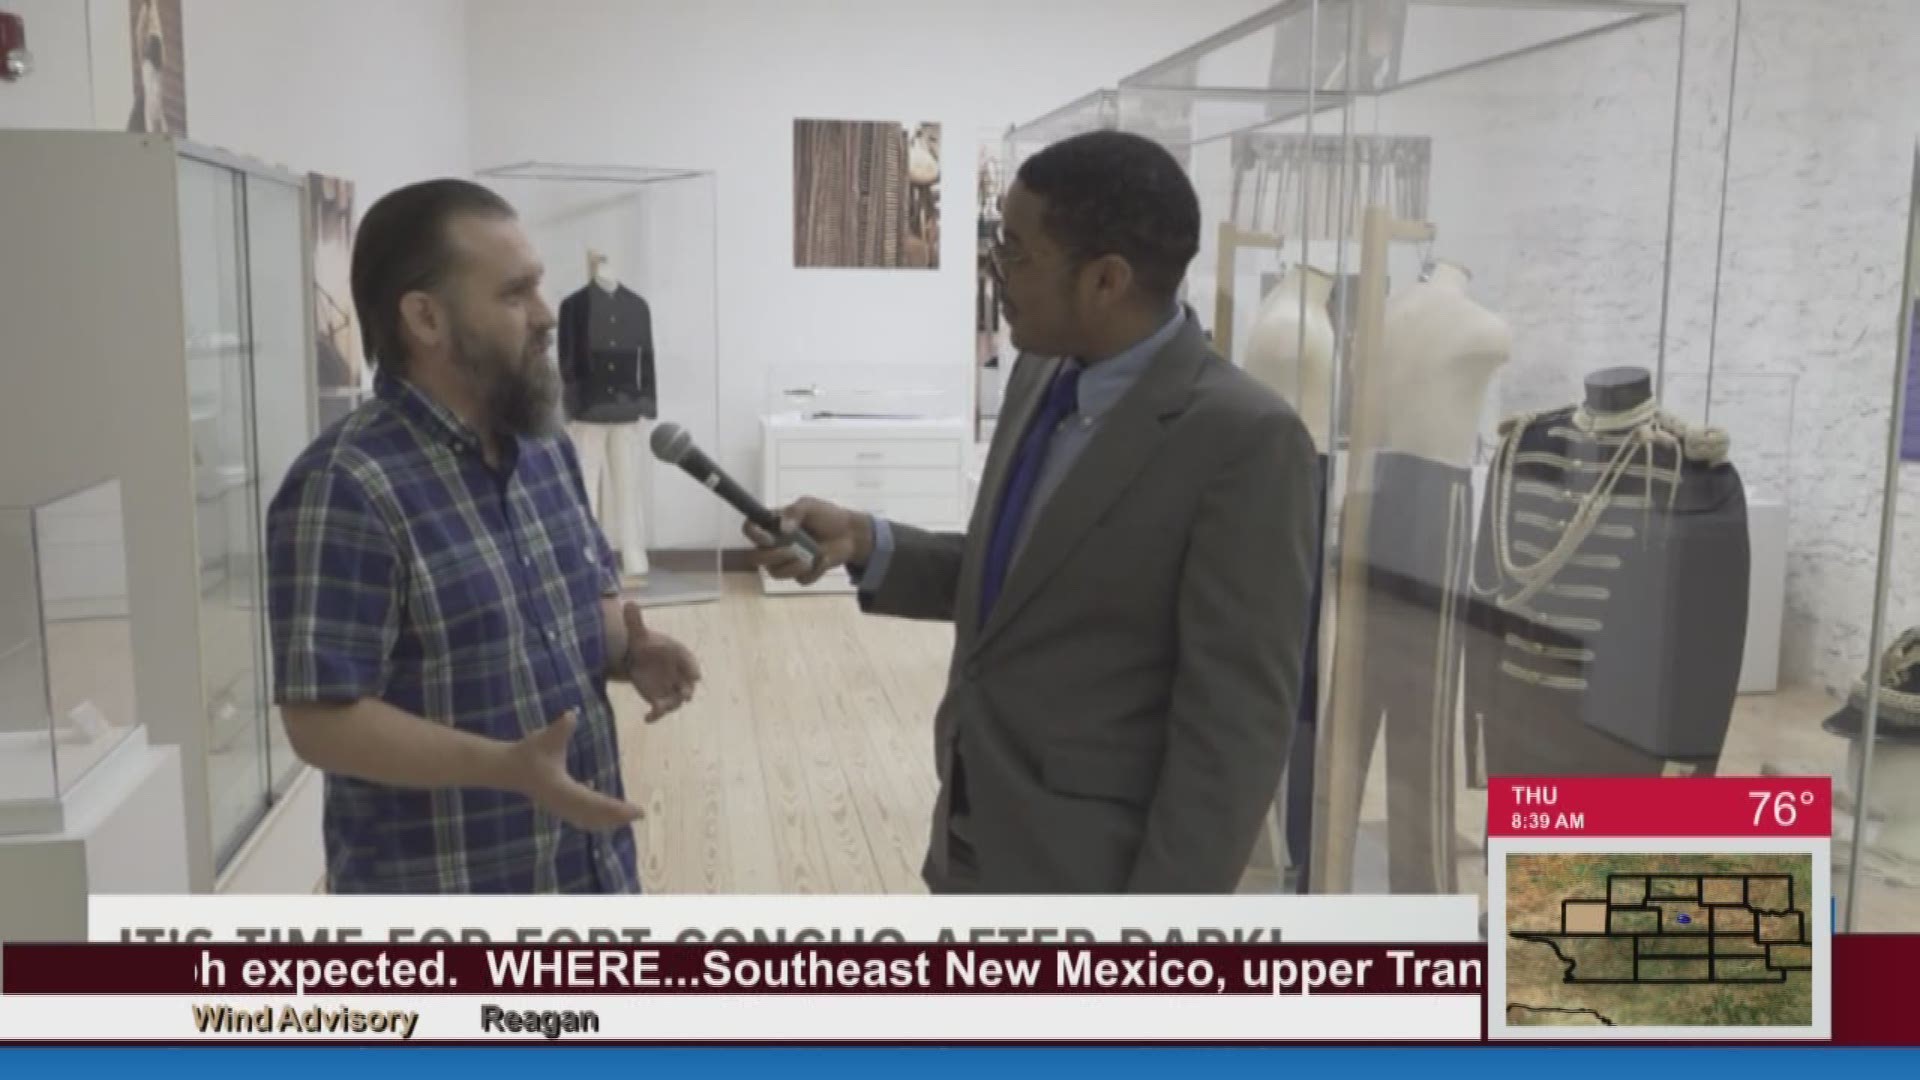 Our Malik Mingo spoke to a museum curator at Old Fort Concho about a new display of the Douglas McChristian collection.